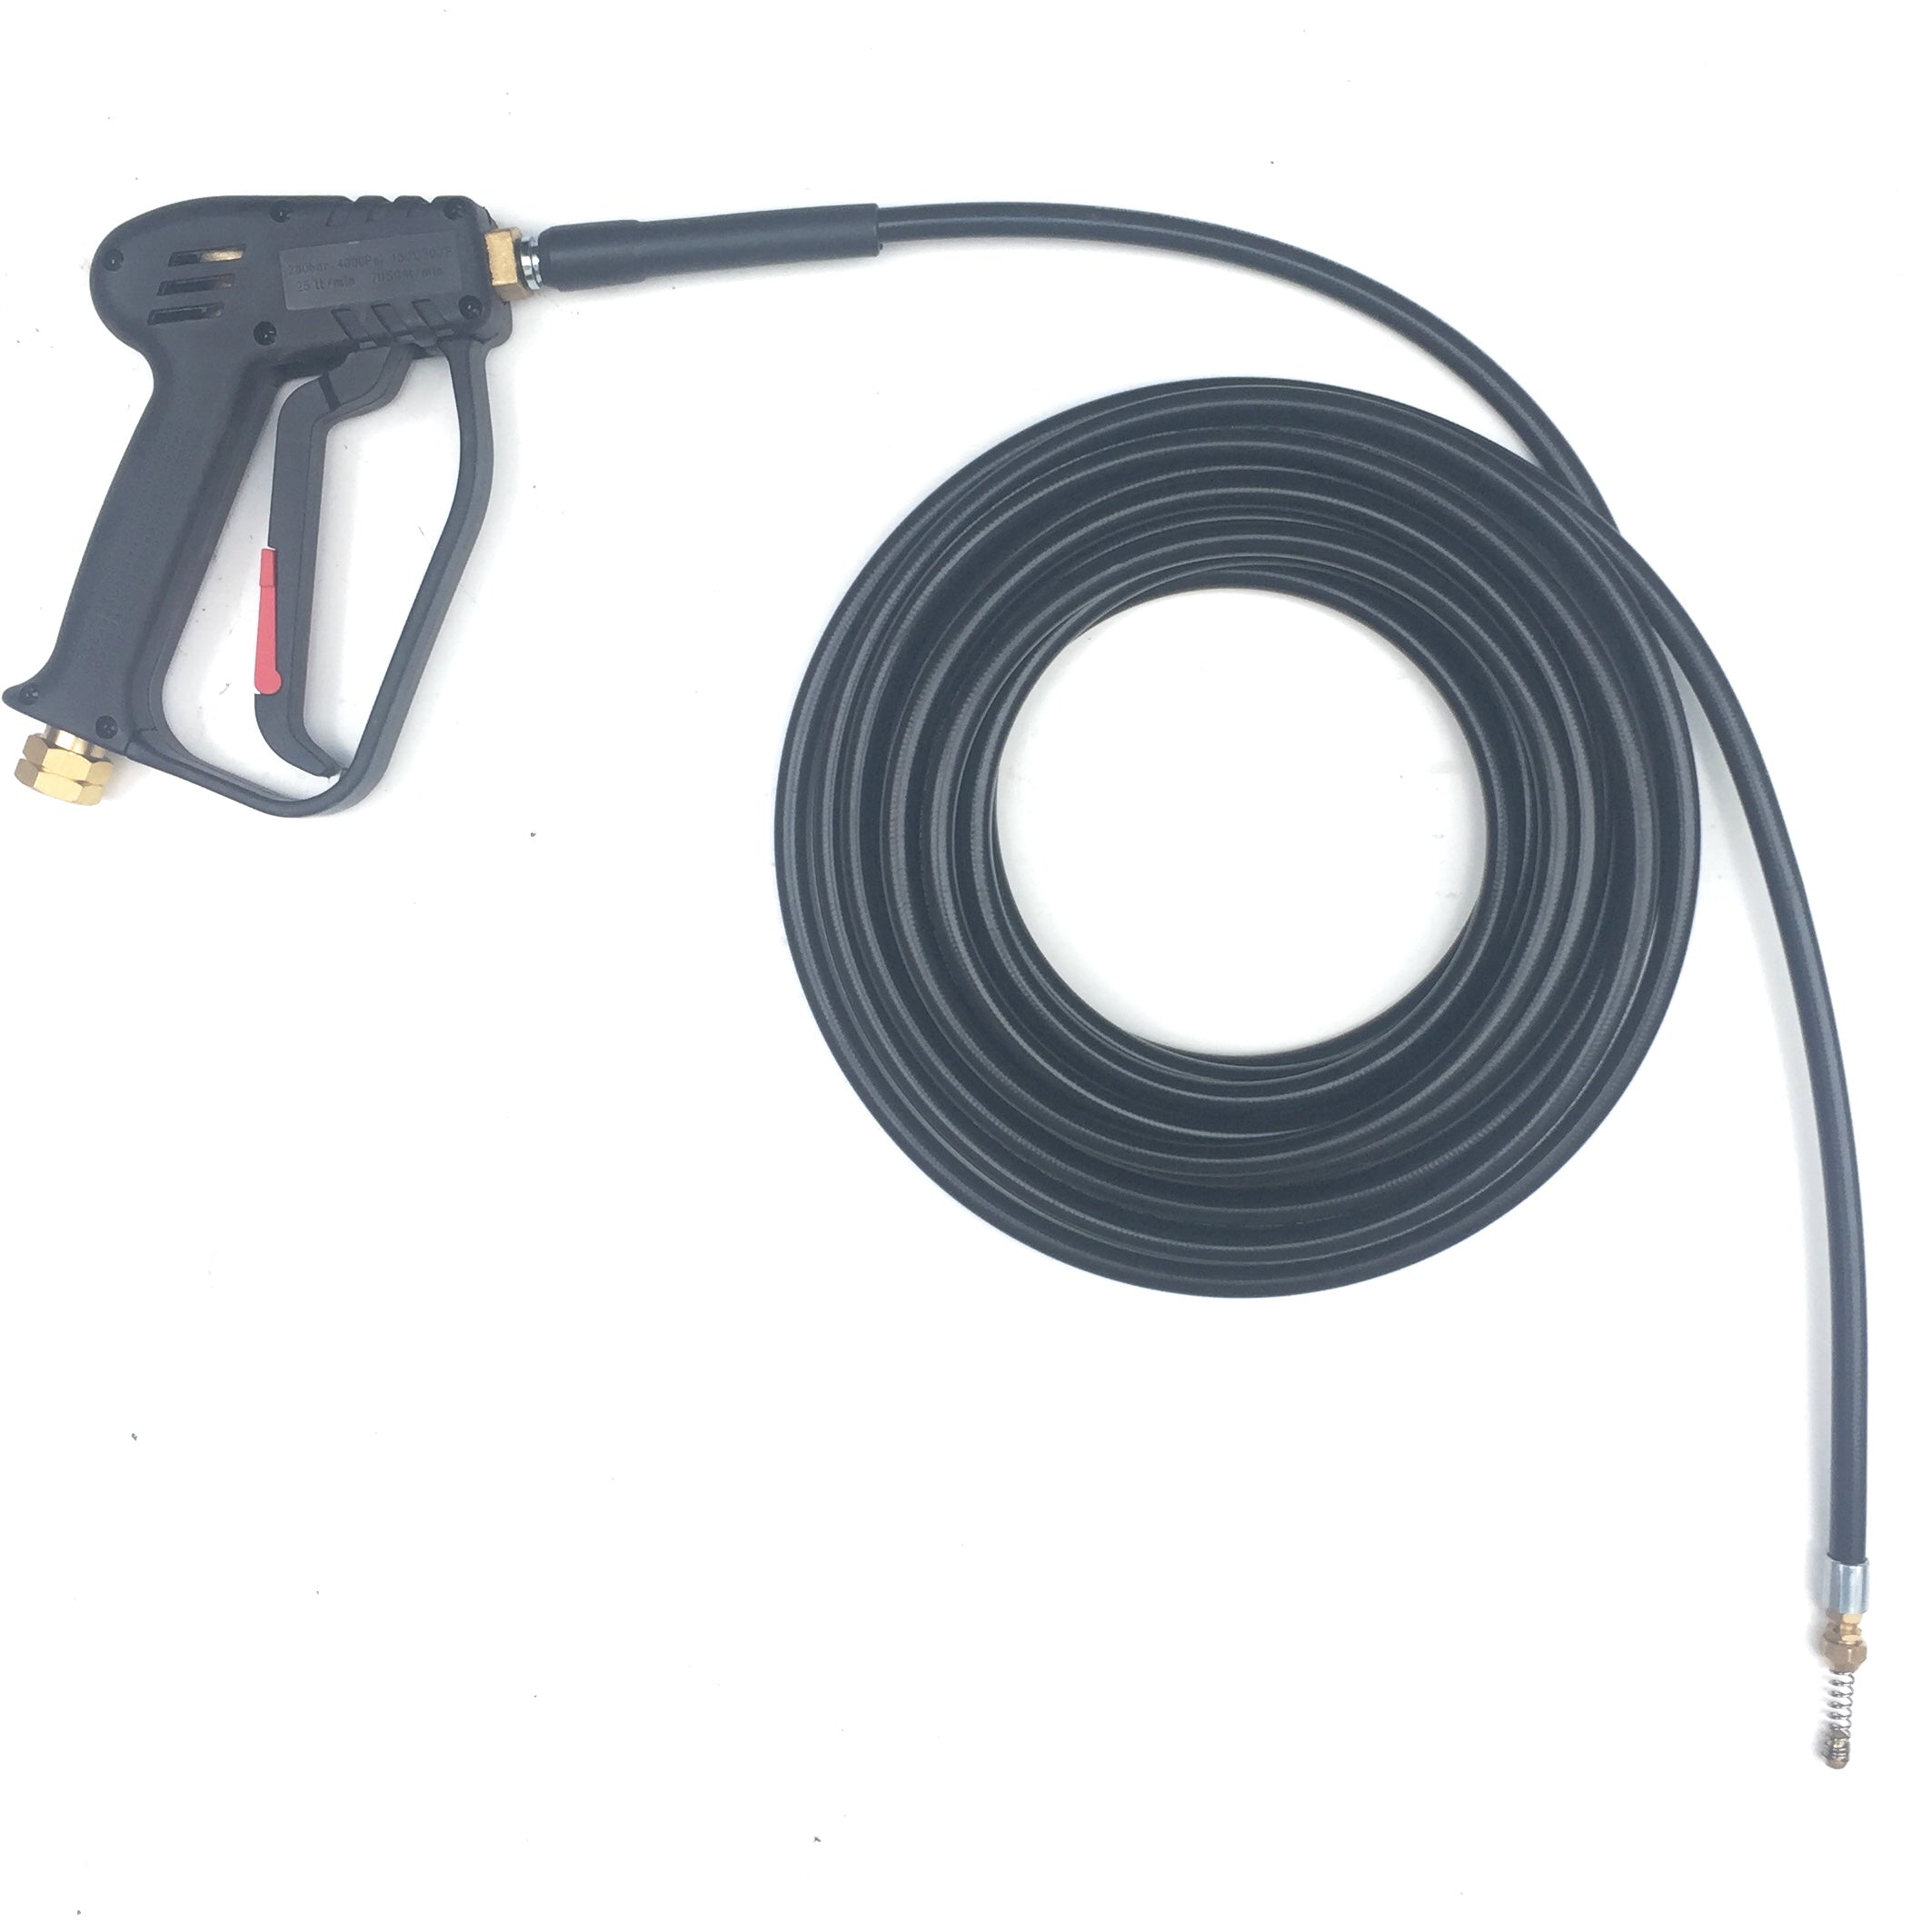 Drain Cleaning Tool with Flexible Cleaning Probe